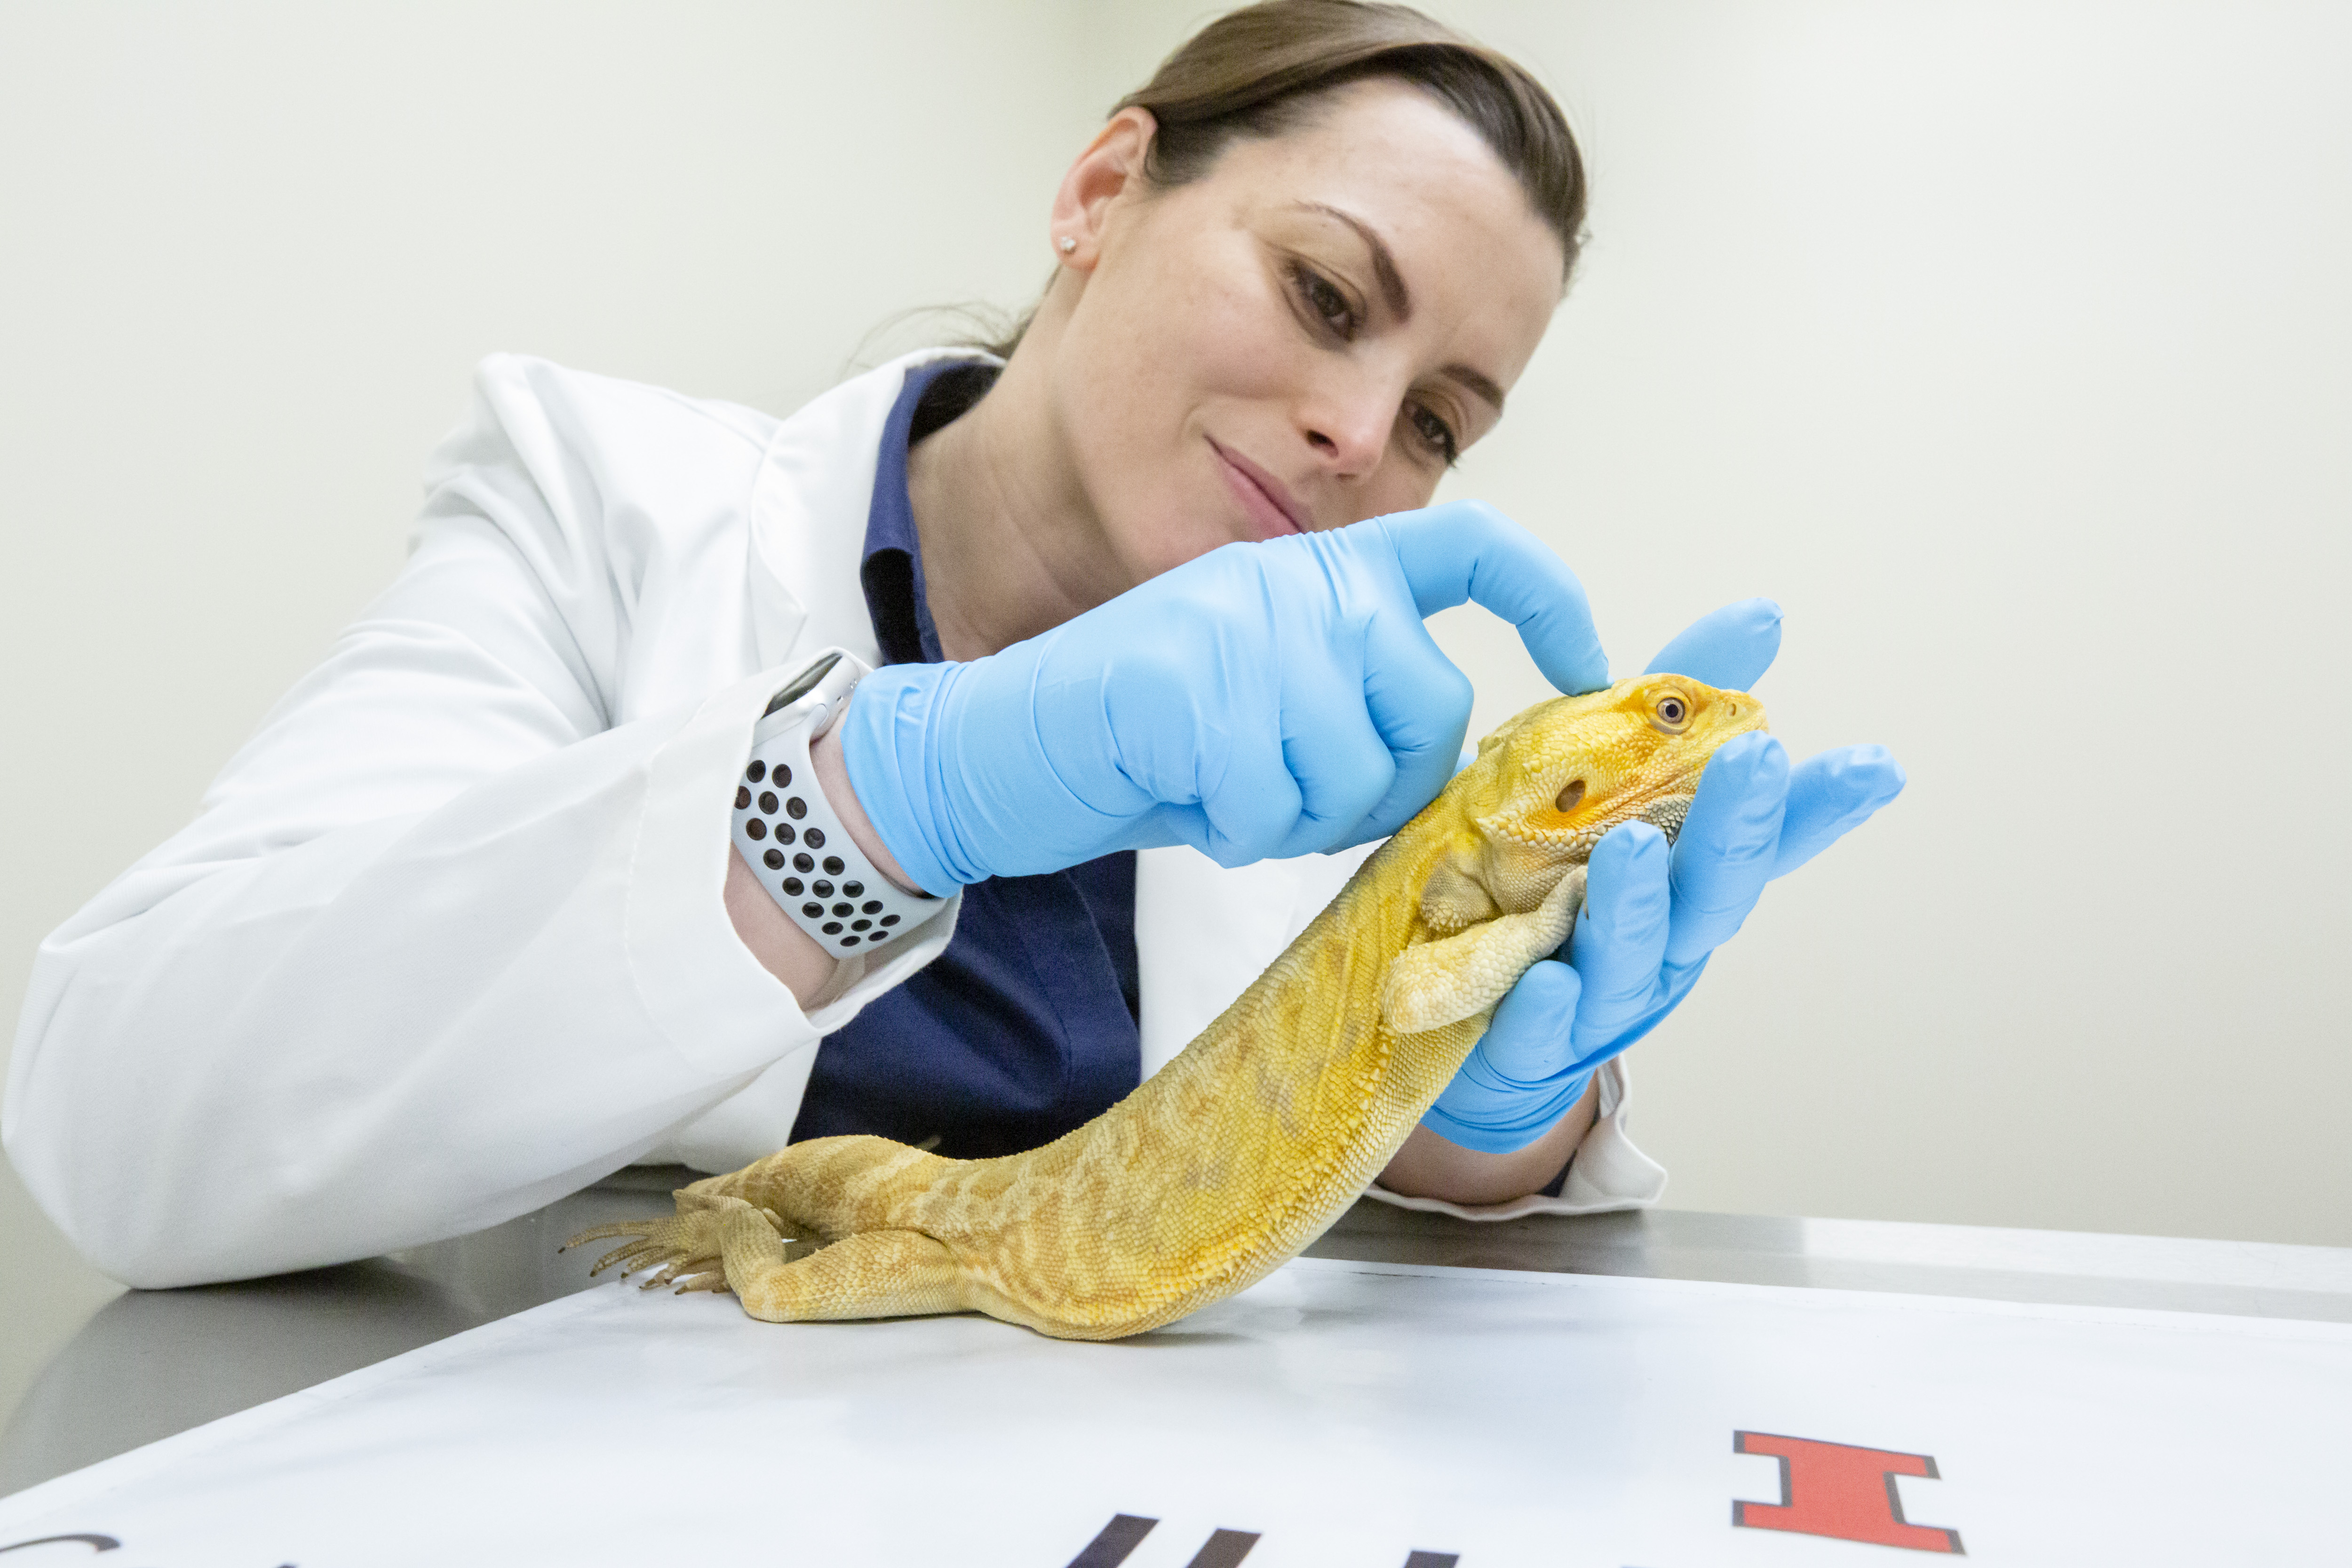 A researcher examines a yellow bearded dragon at the College of Veterinary Medicine.